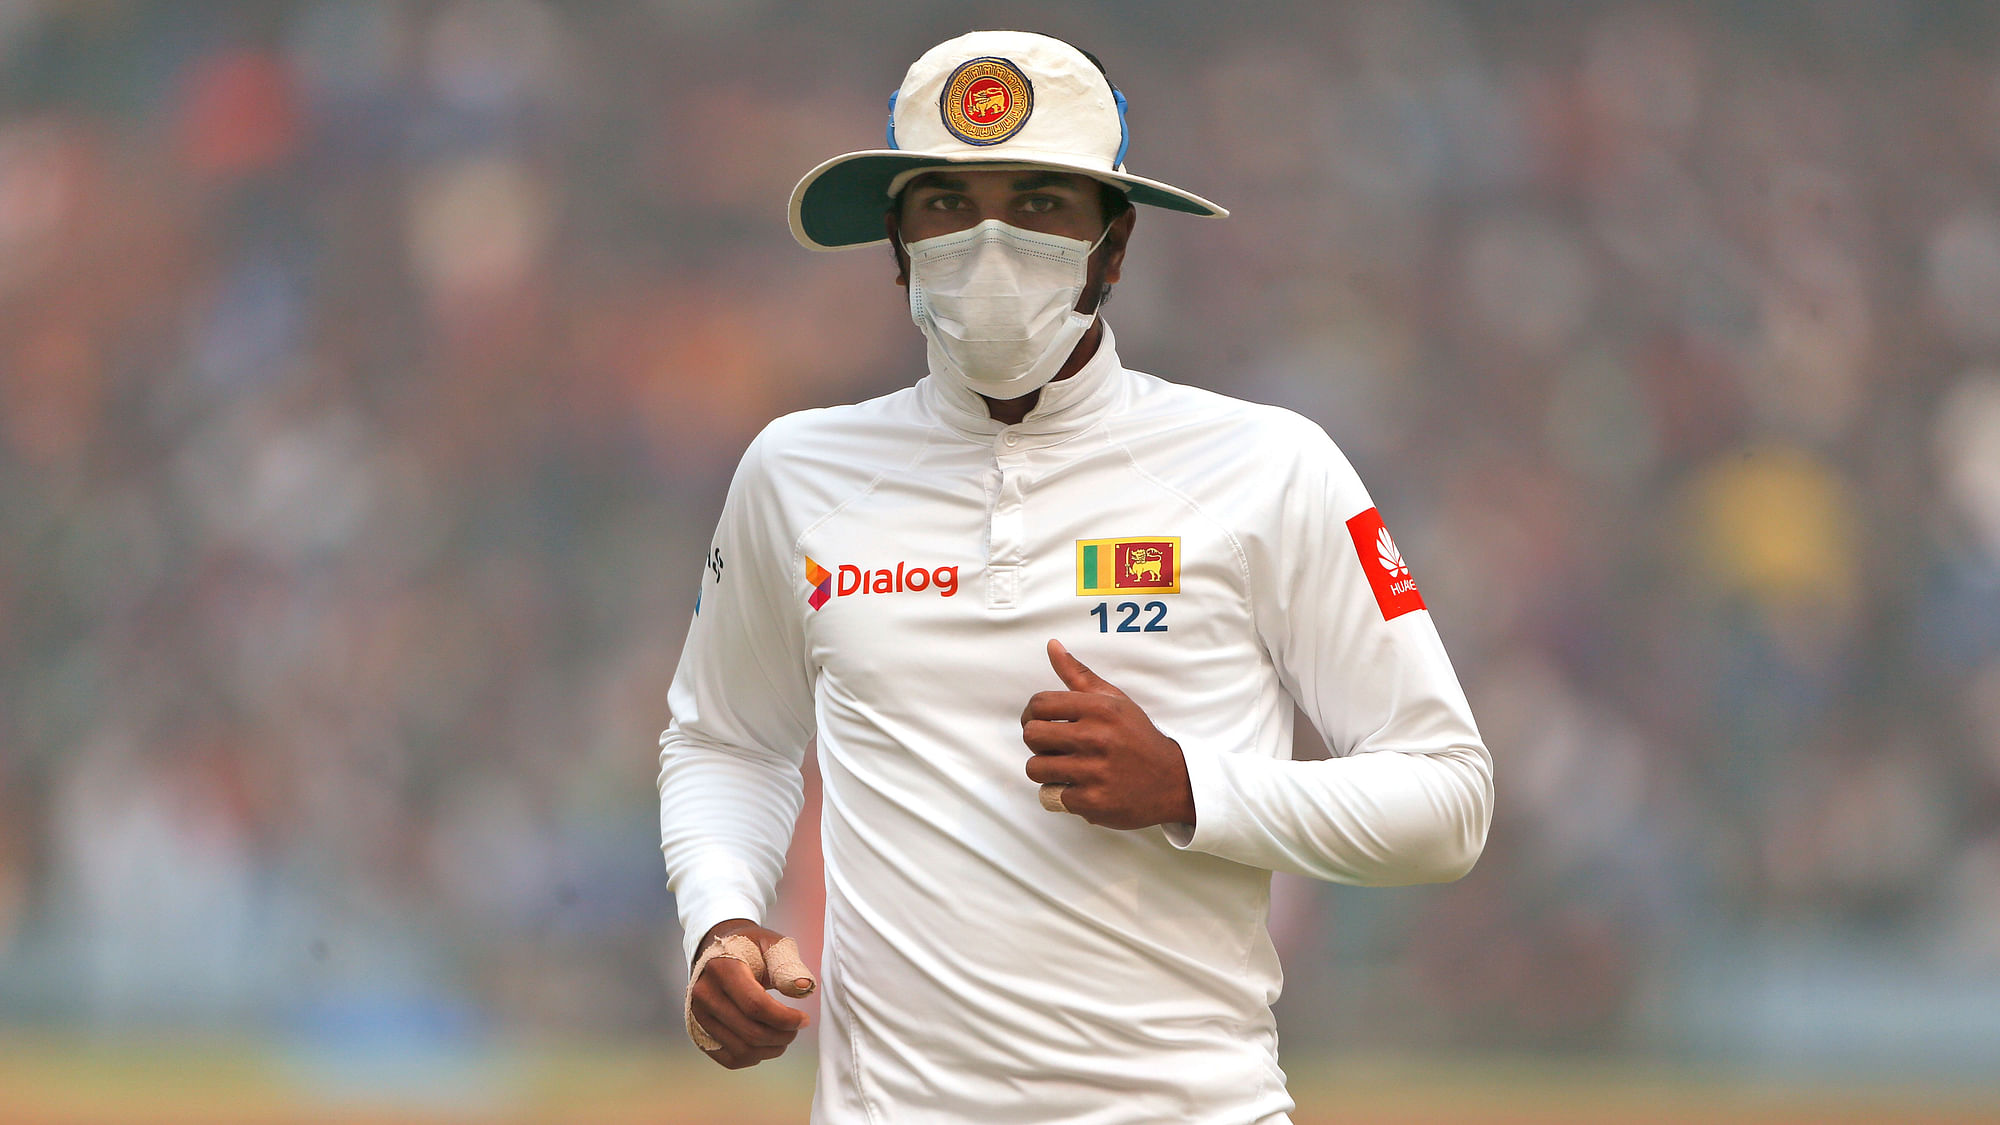 Sri Lankan cricketers were forced to wear masks while fielding.